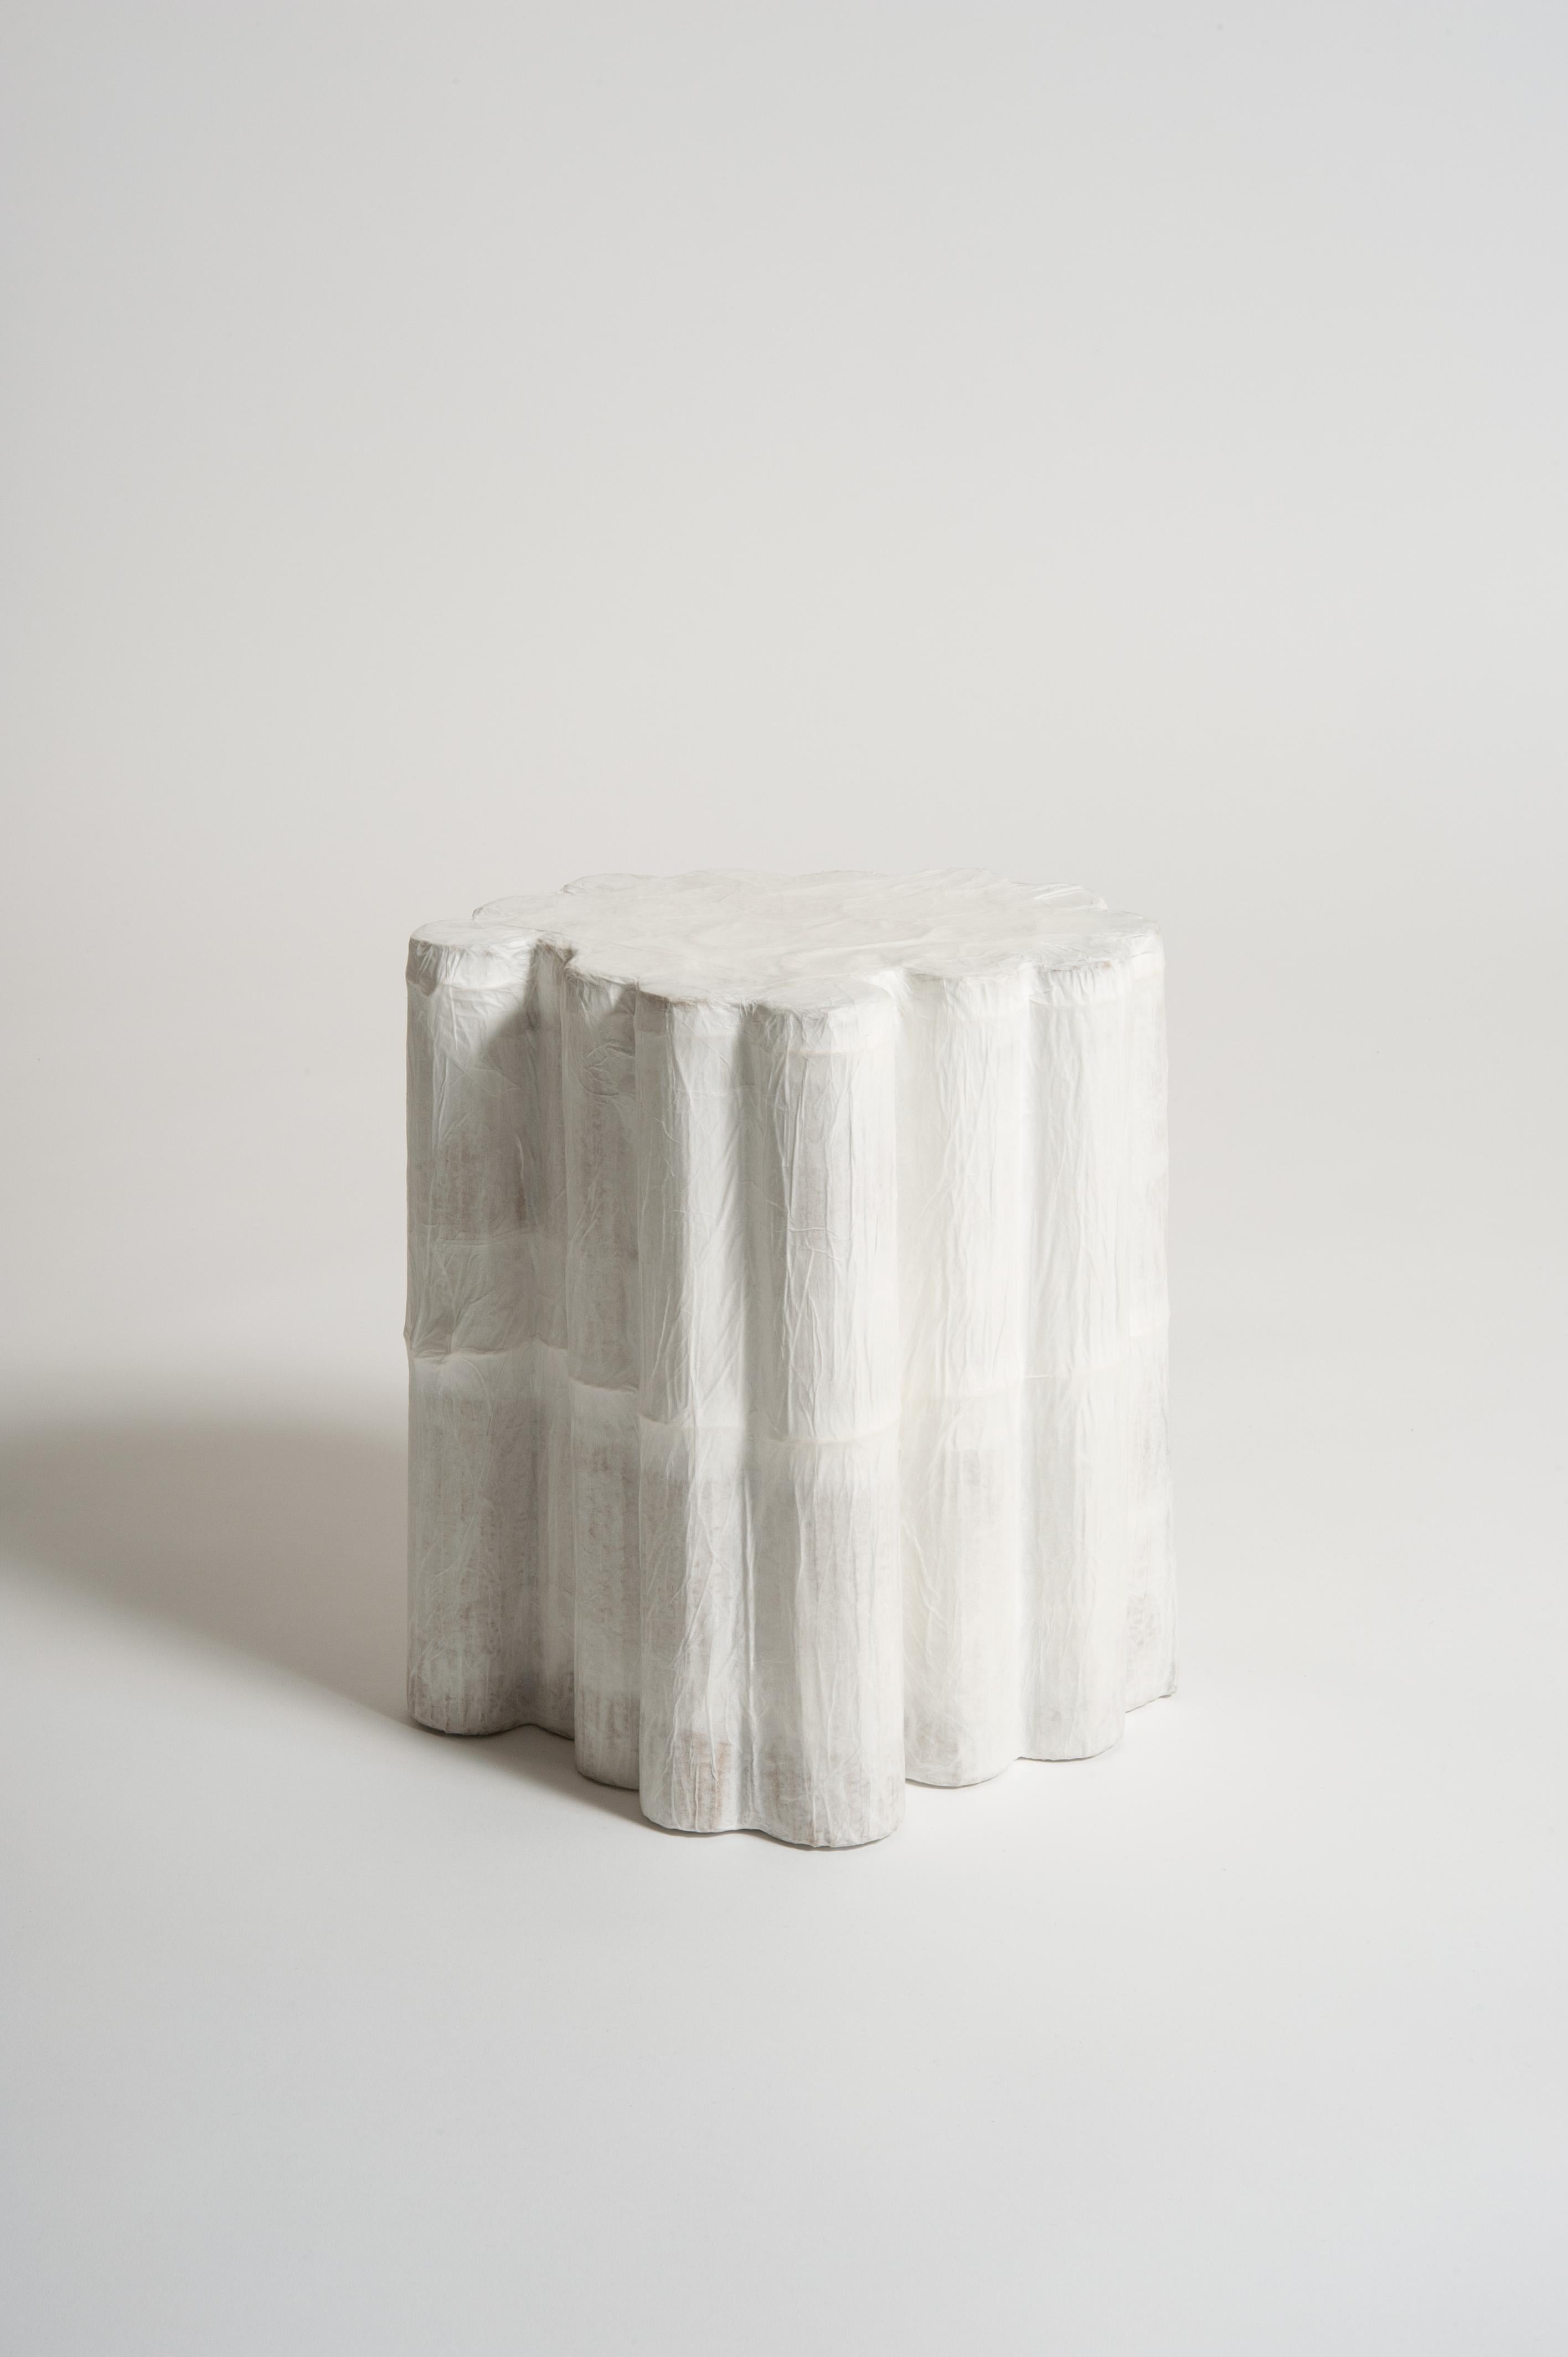 Stump low stool by Studio Yoon Seok-hyeon.
Dimensions: W 30 x H 30
Materials: Paper (mostly recycled) and natural adhesive.
1.5kg

It is available to customize various sizes, colors, heights, and even shapes of stool, table, and lamp
and to